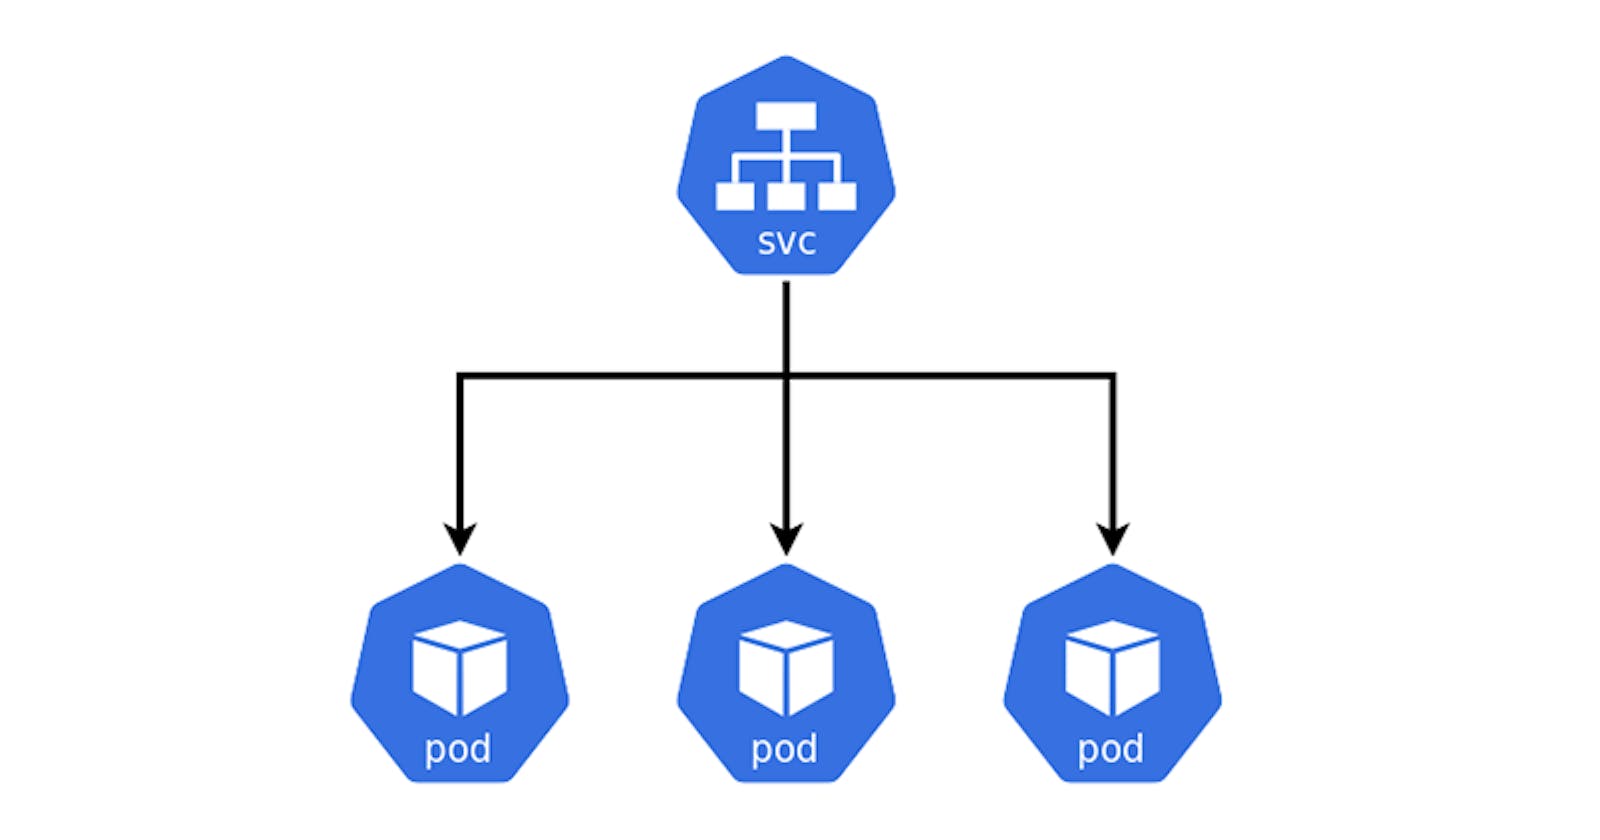 Services in Kubernetes